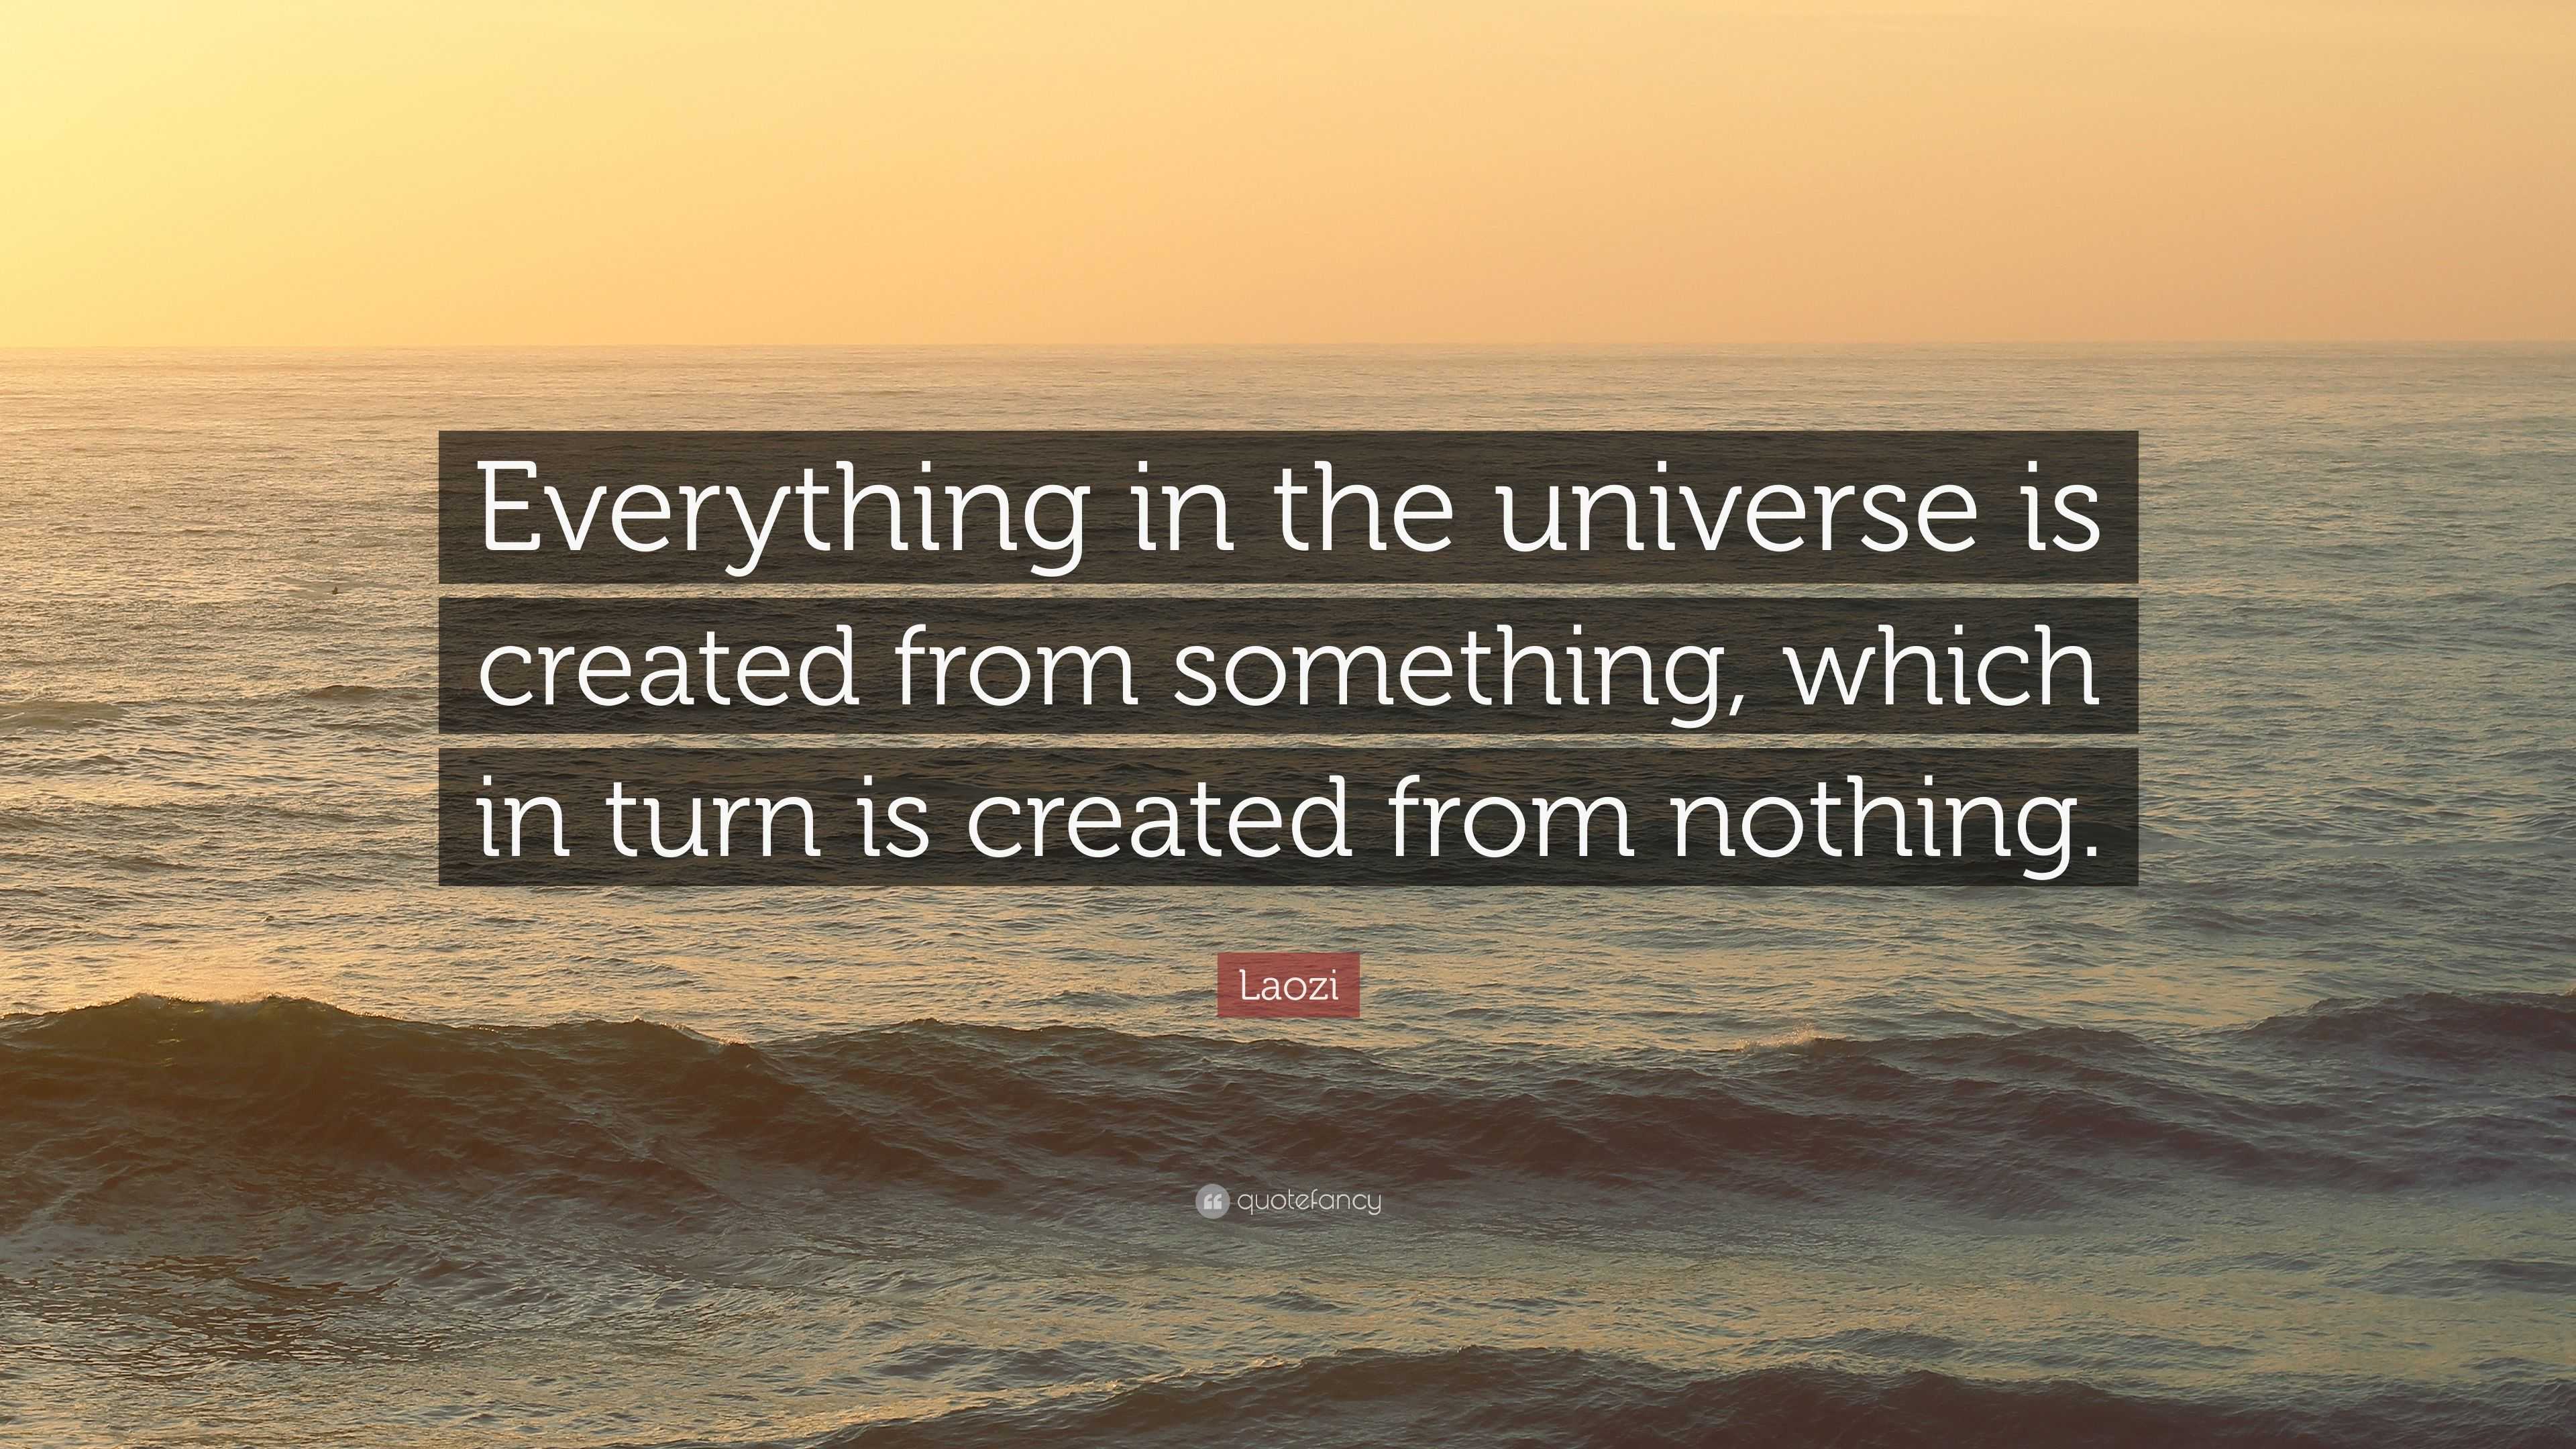 Laozi Quote: “Everything in the universe is created from something ...